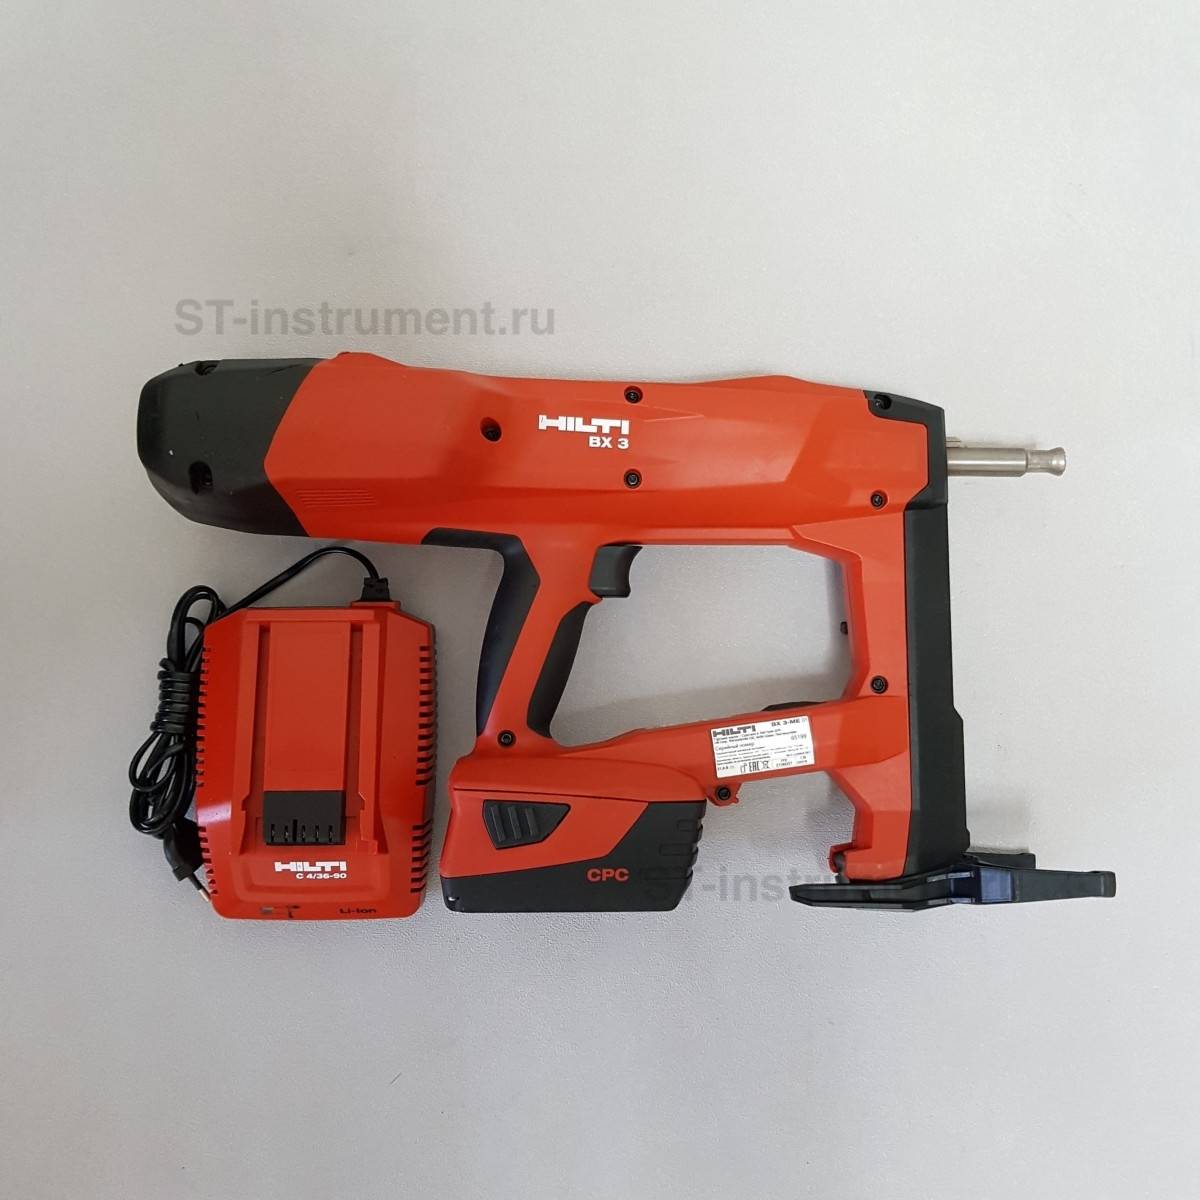 Hilti bx 3 actuated fastener review - tools in action